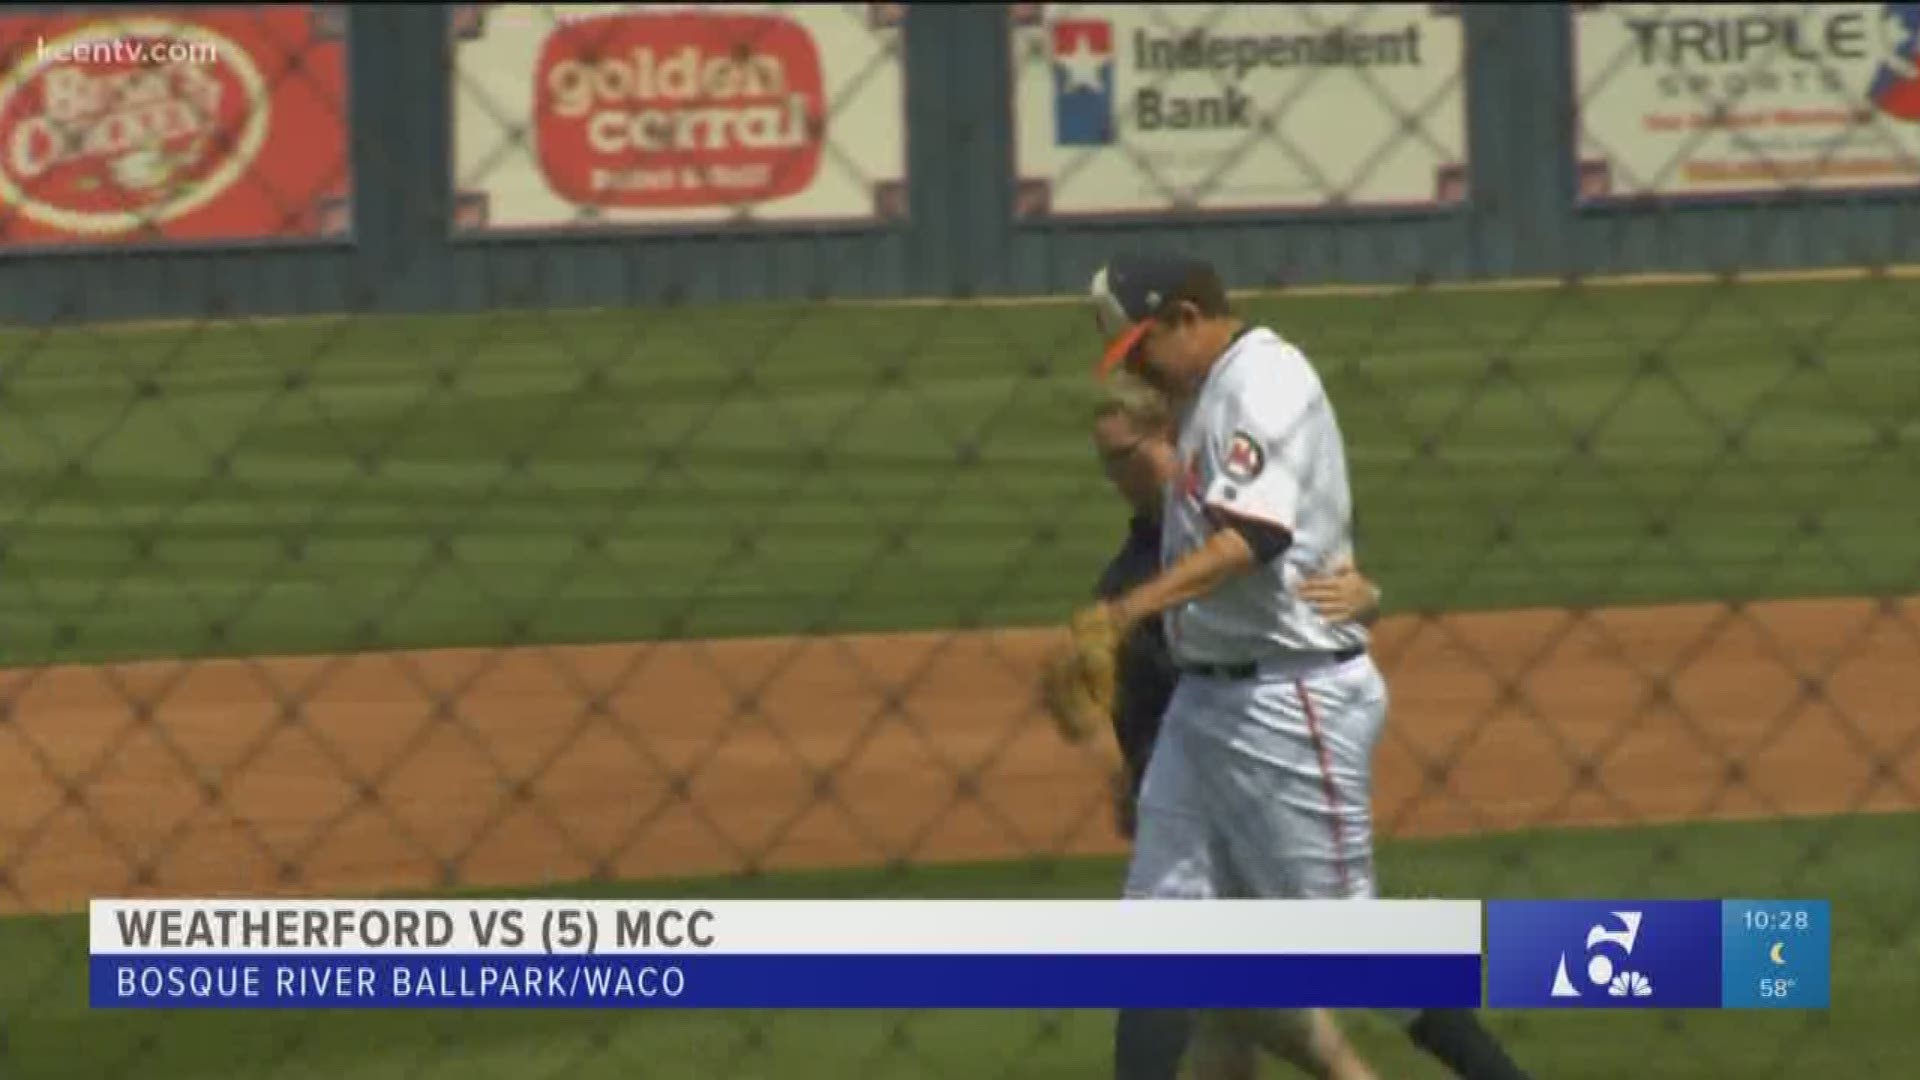 Number 5 MCC played host to Weatherford in game one of a double-header. 